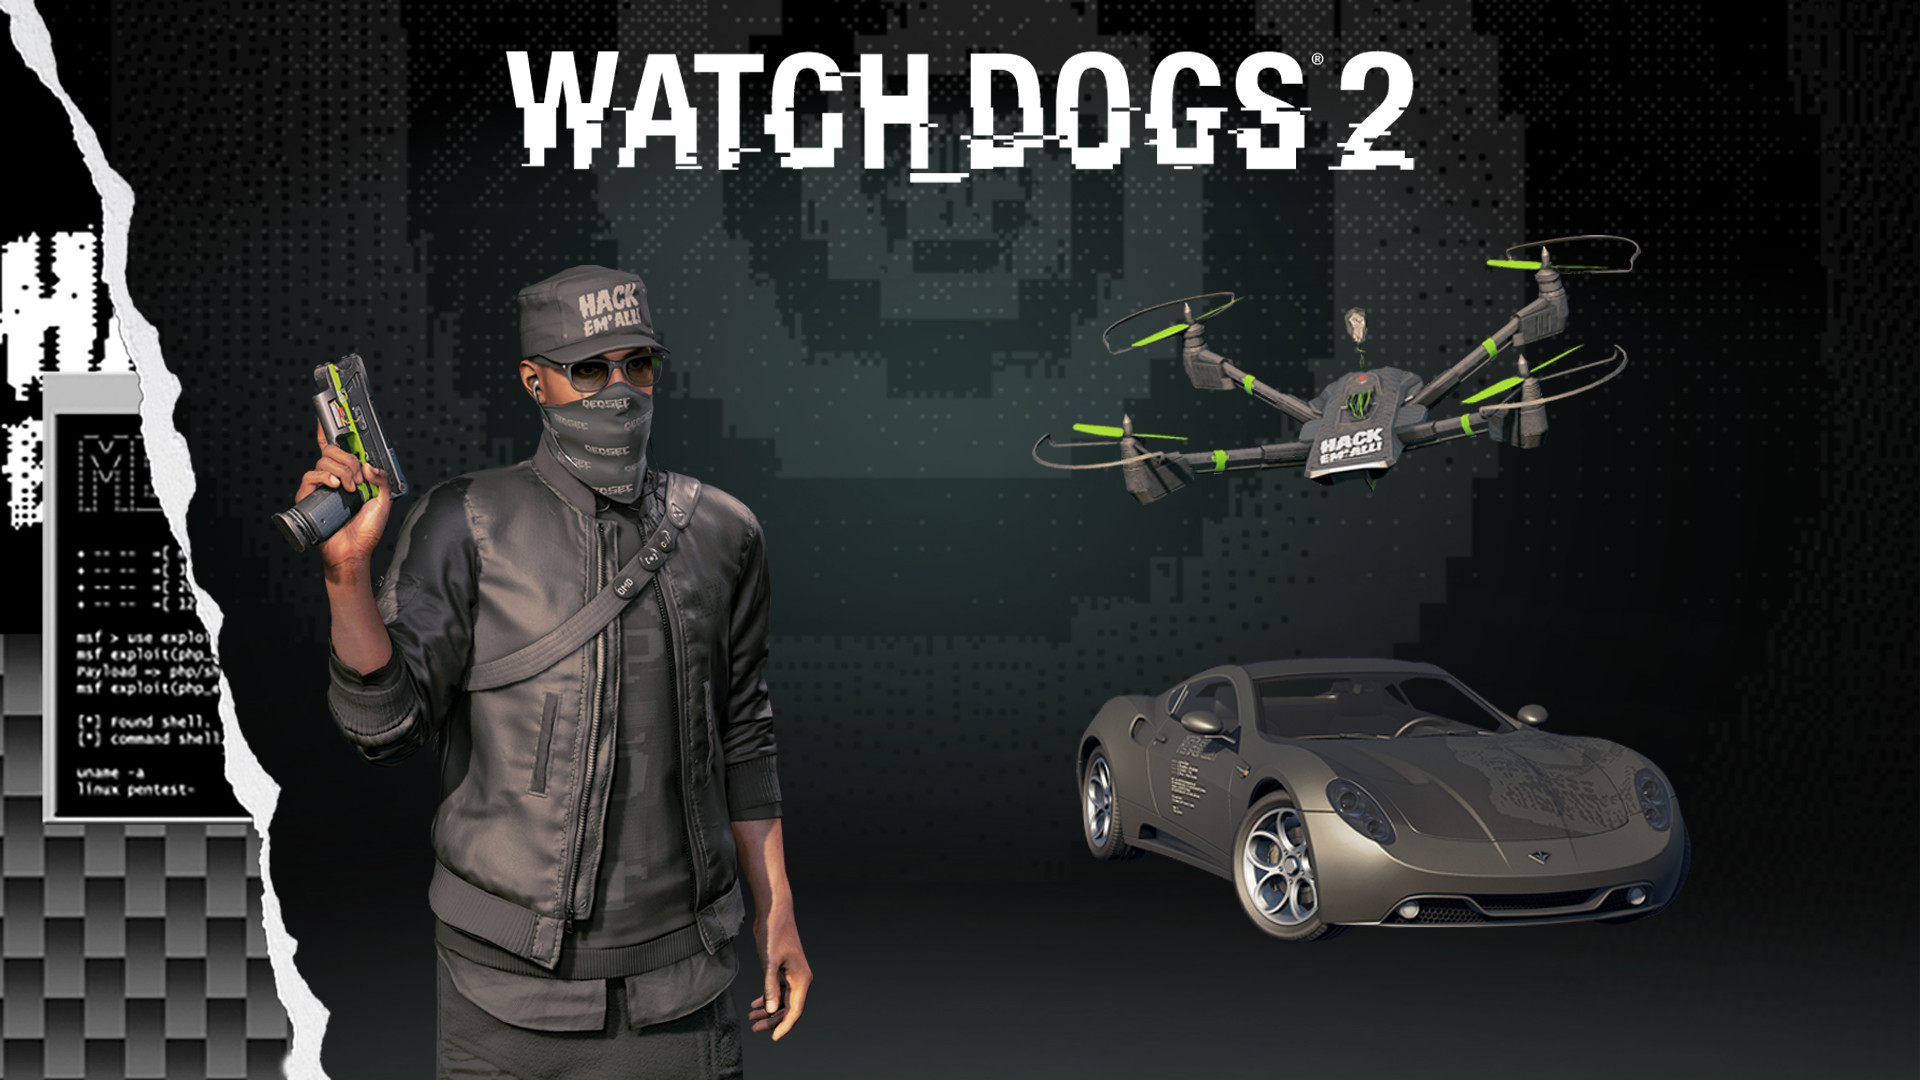 Watch_Dogs® 2 - Black Hat Pack Featured Screenshot #1